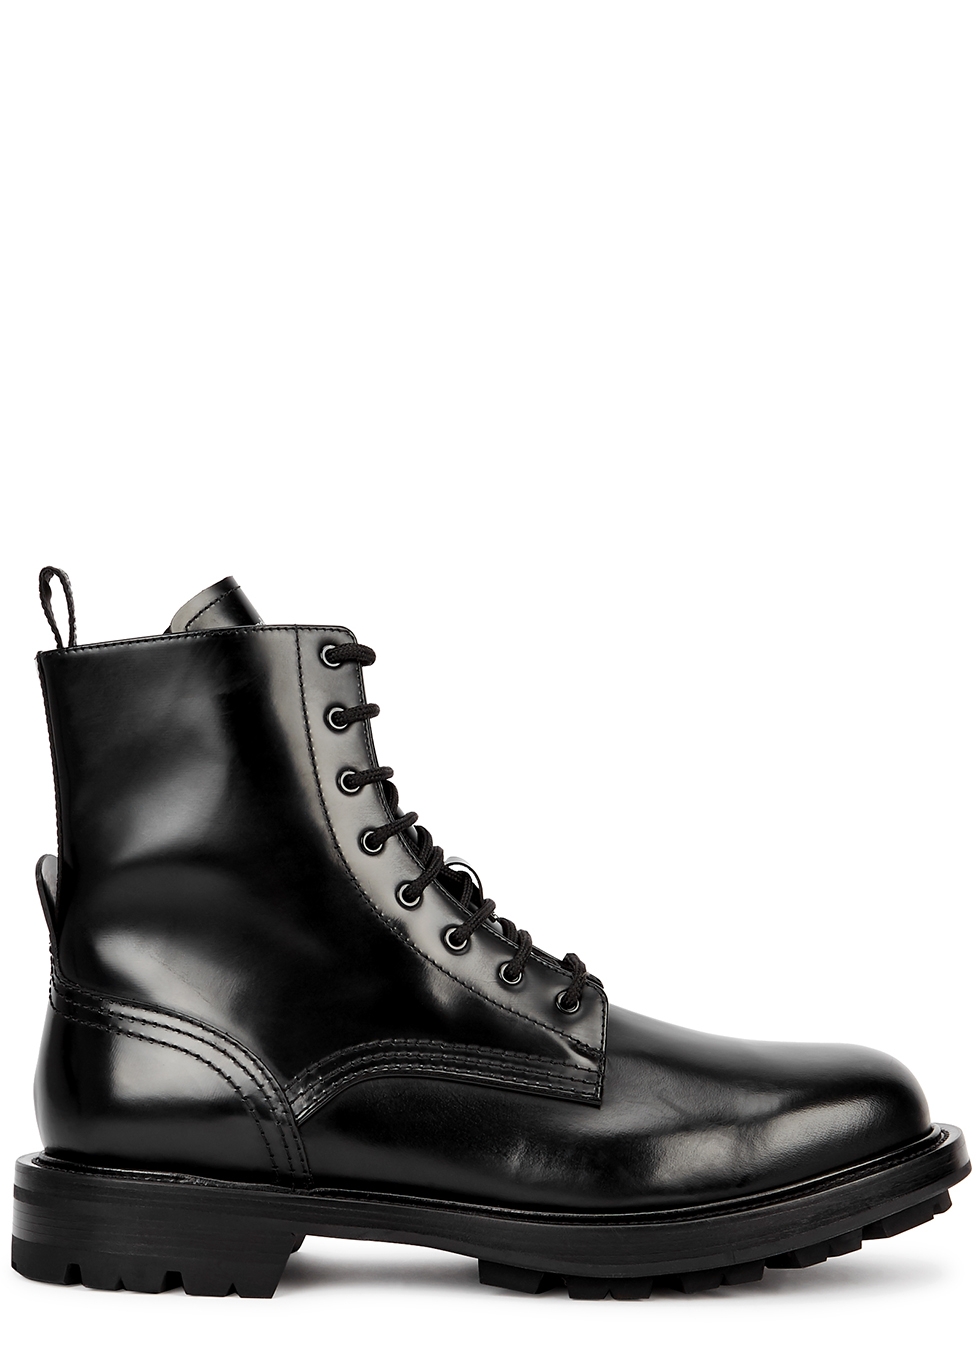 Black glossed leather combat boots